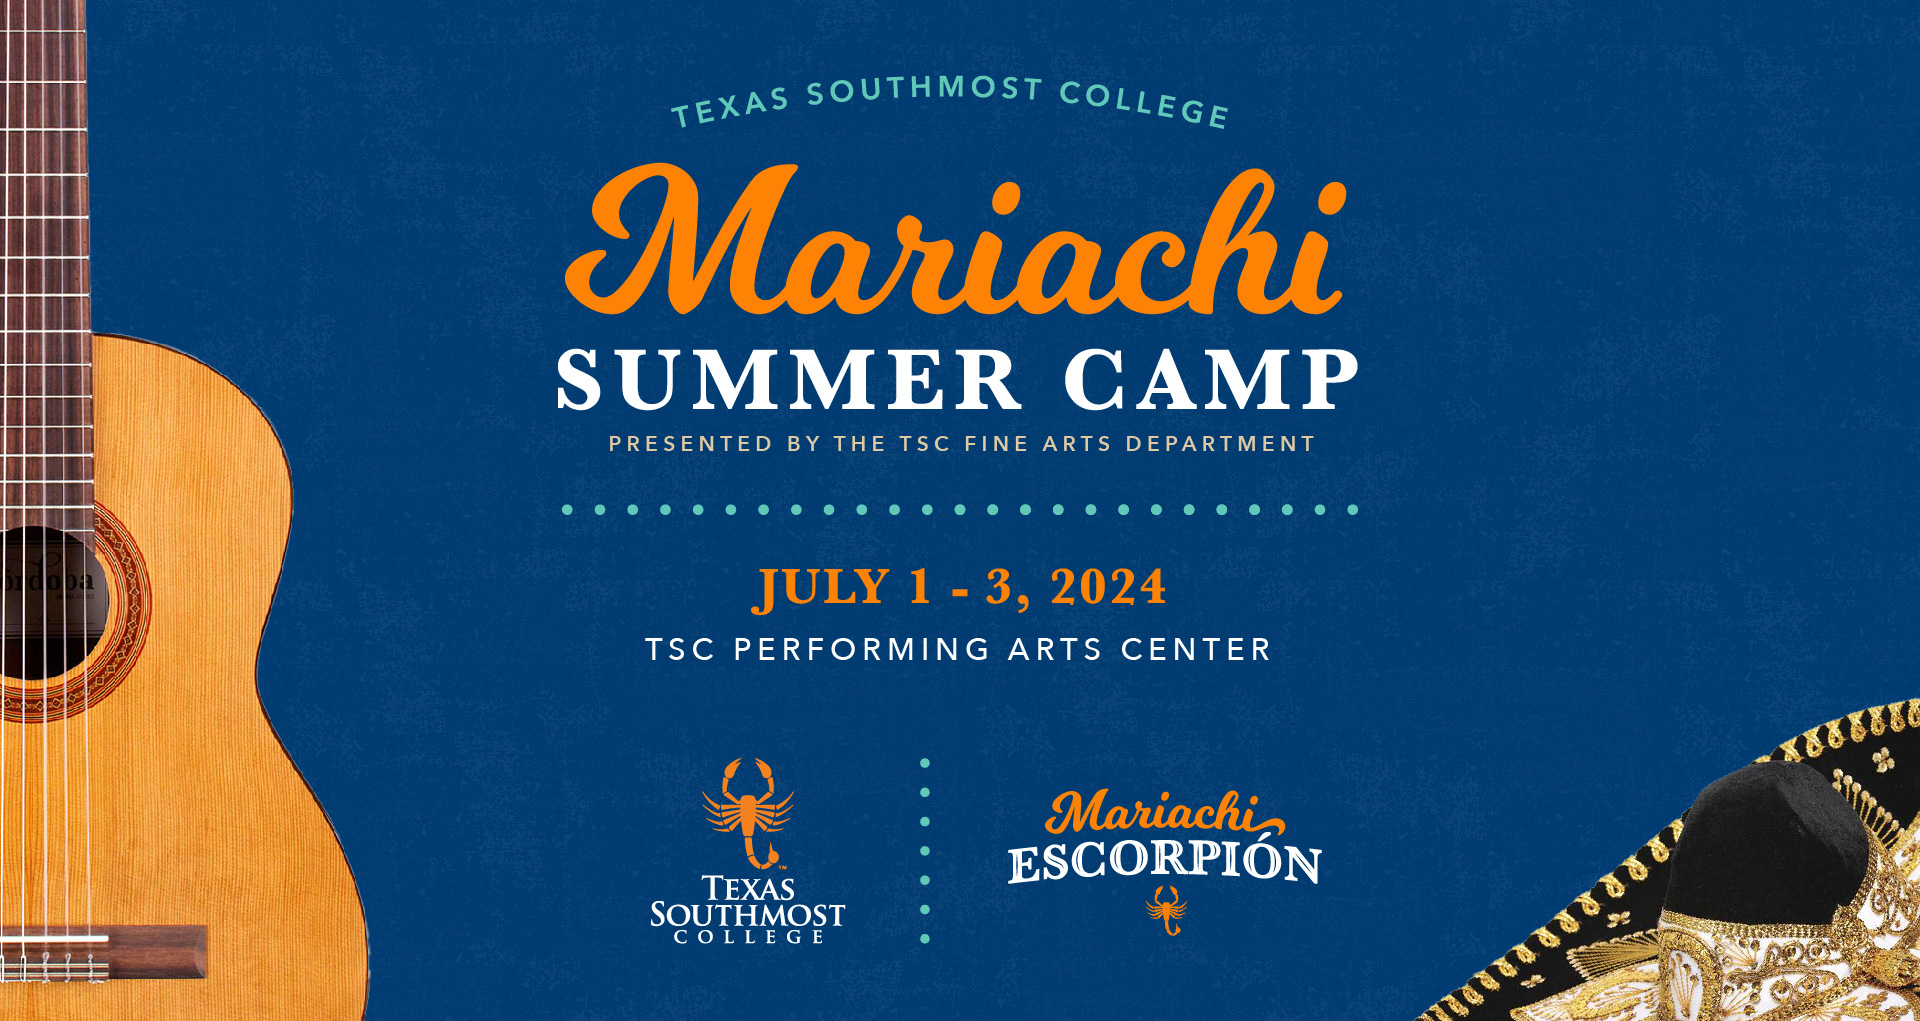 Texas Southmost College Fine Arts Department will be hosting a Mariachi Summer Camp from July 1 -3 2024, at the TSC Performing Arts Center in Brownsville. 